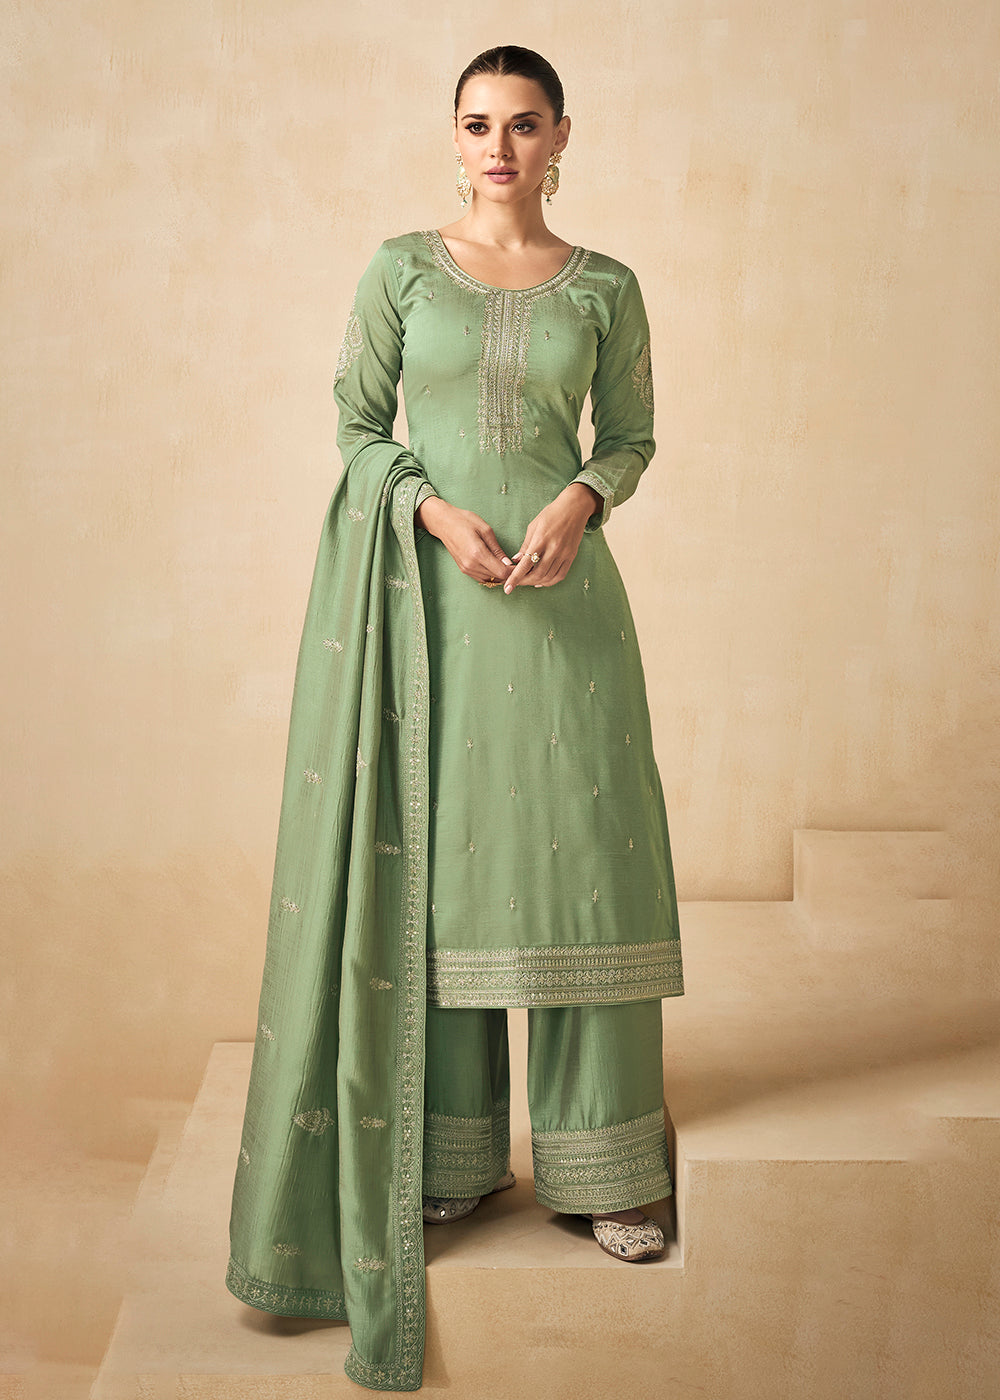 Buy Now Premium Silk Pretty Green Embroidered Straight Palazzo Salwar Suit Online in USA, UK, Canada, Germany, Australia & Worldwide at Empress Clothing. 